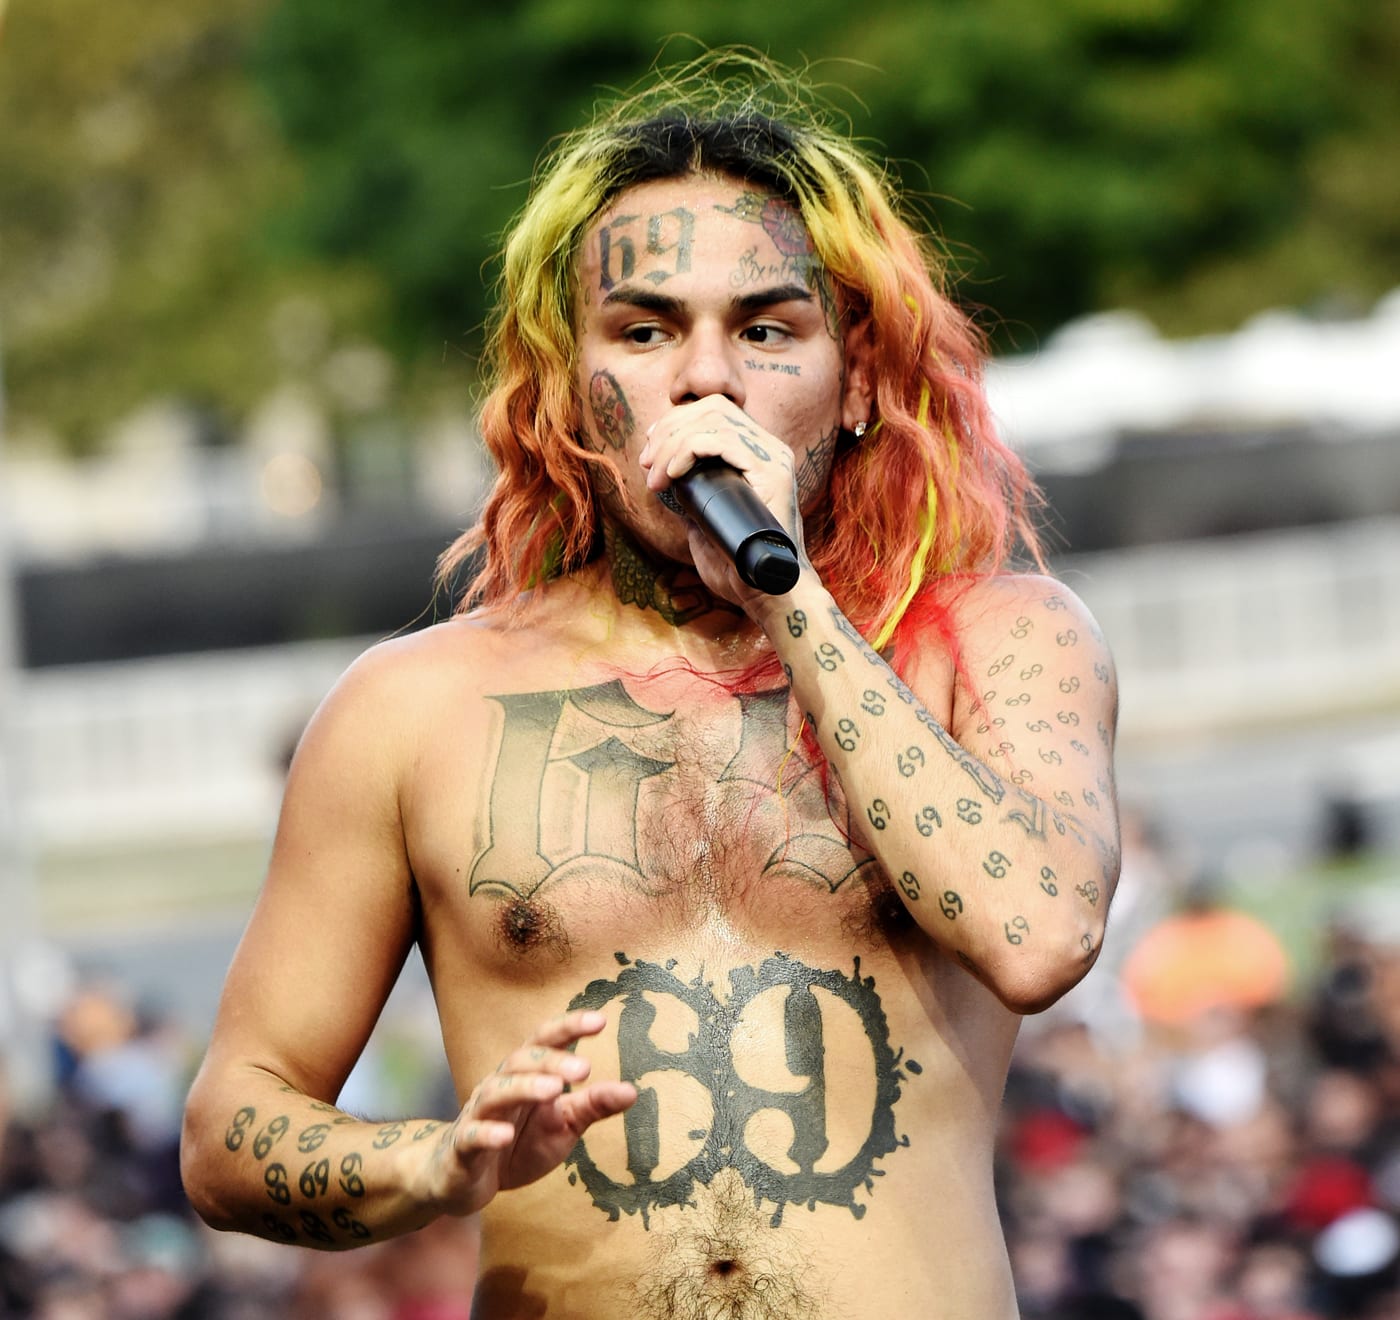 tekashi on stage with 69 all over his body 